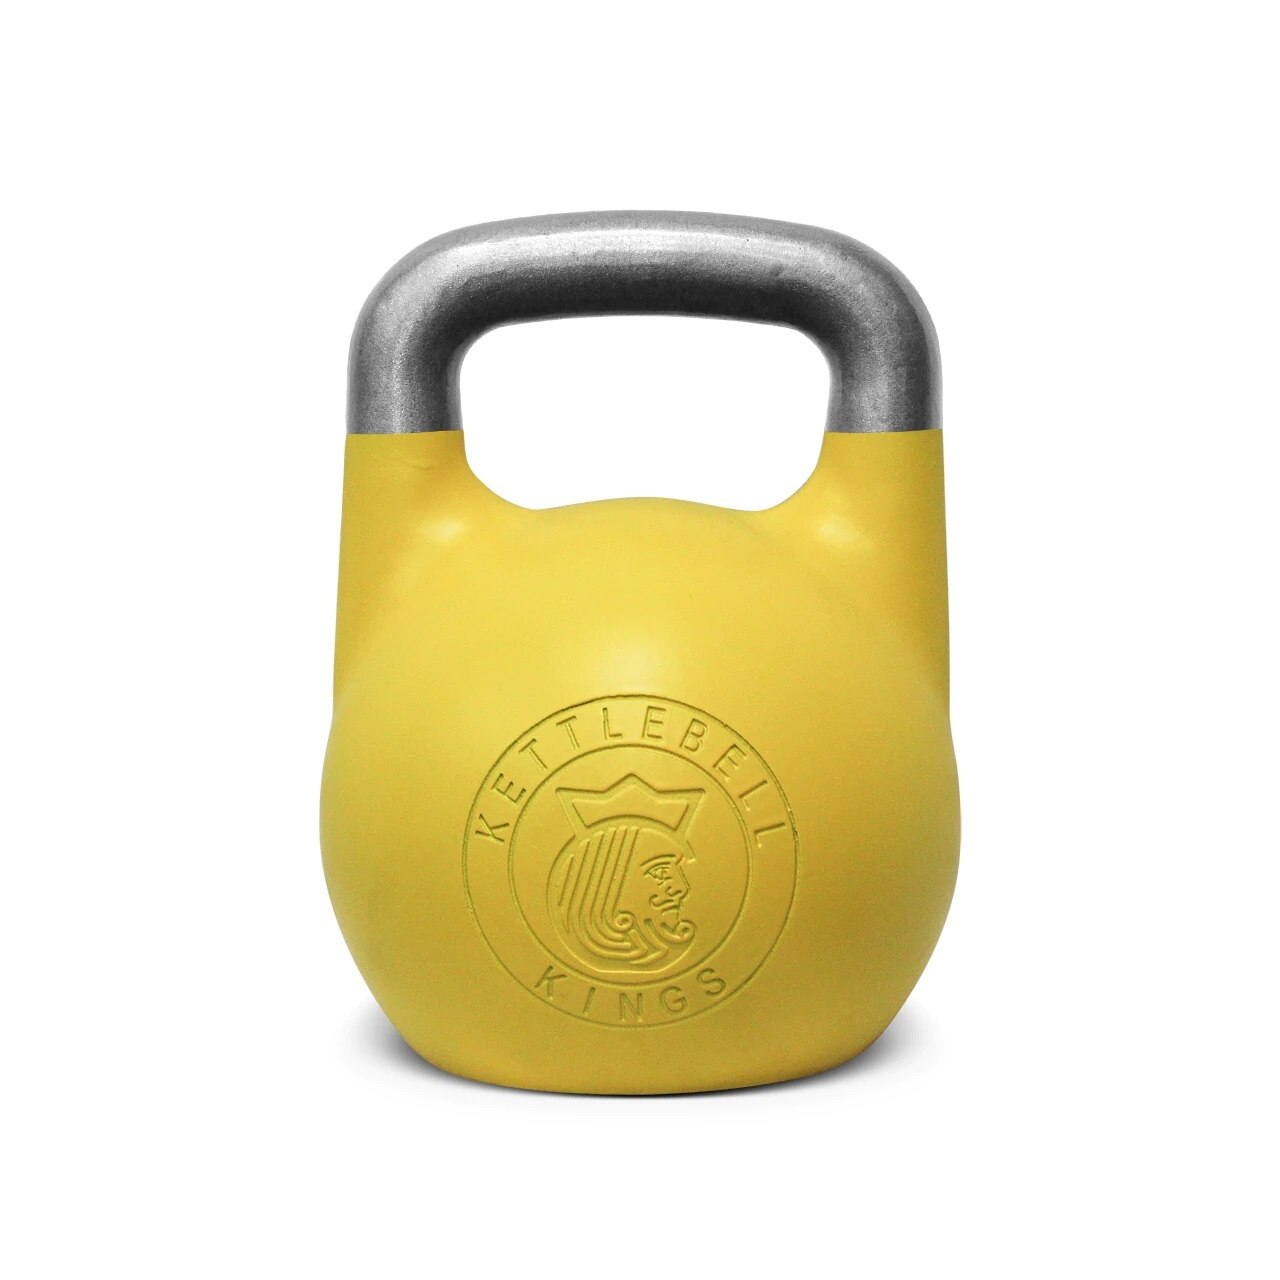 Competition Kettlebells: What Are They Used For?